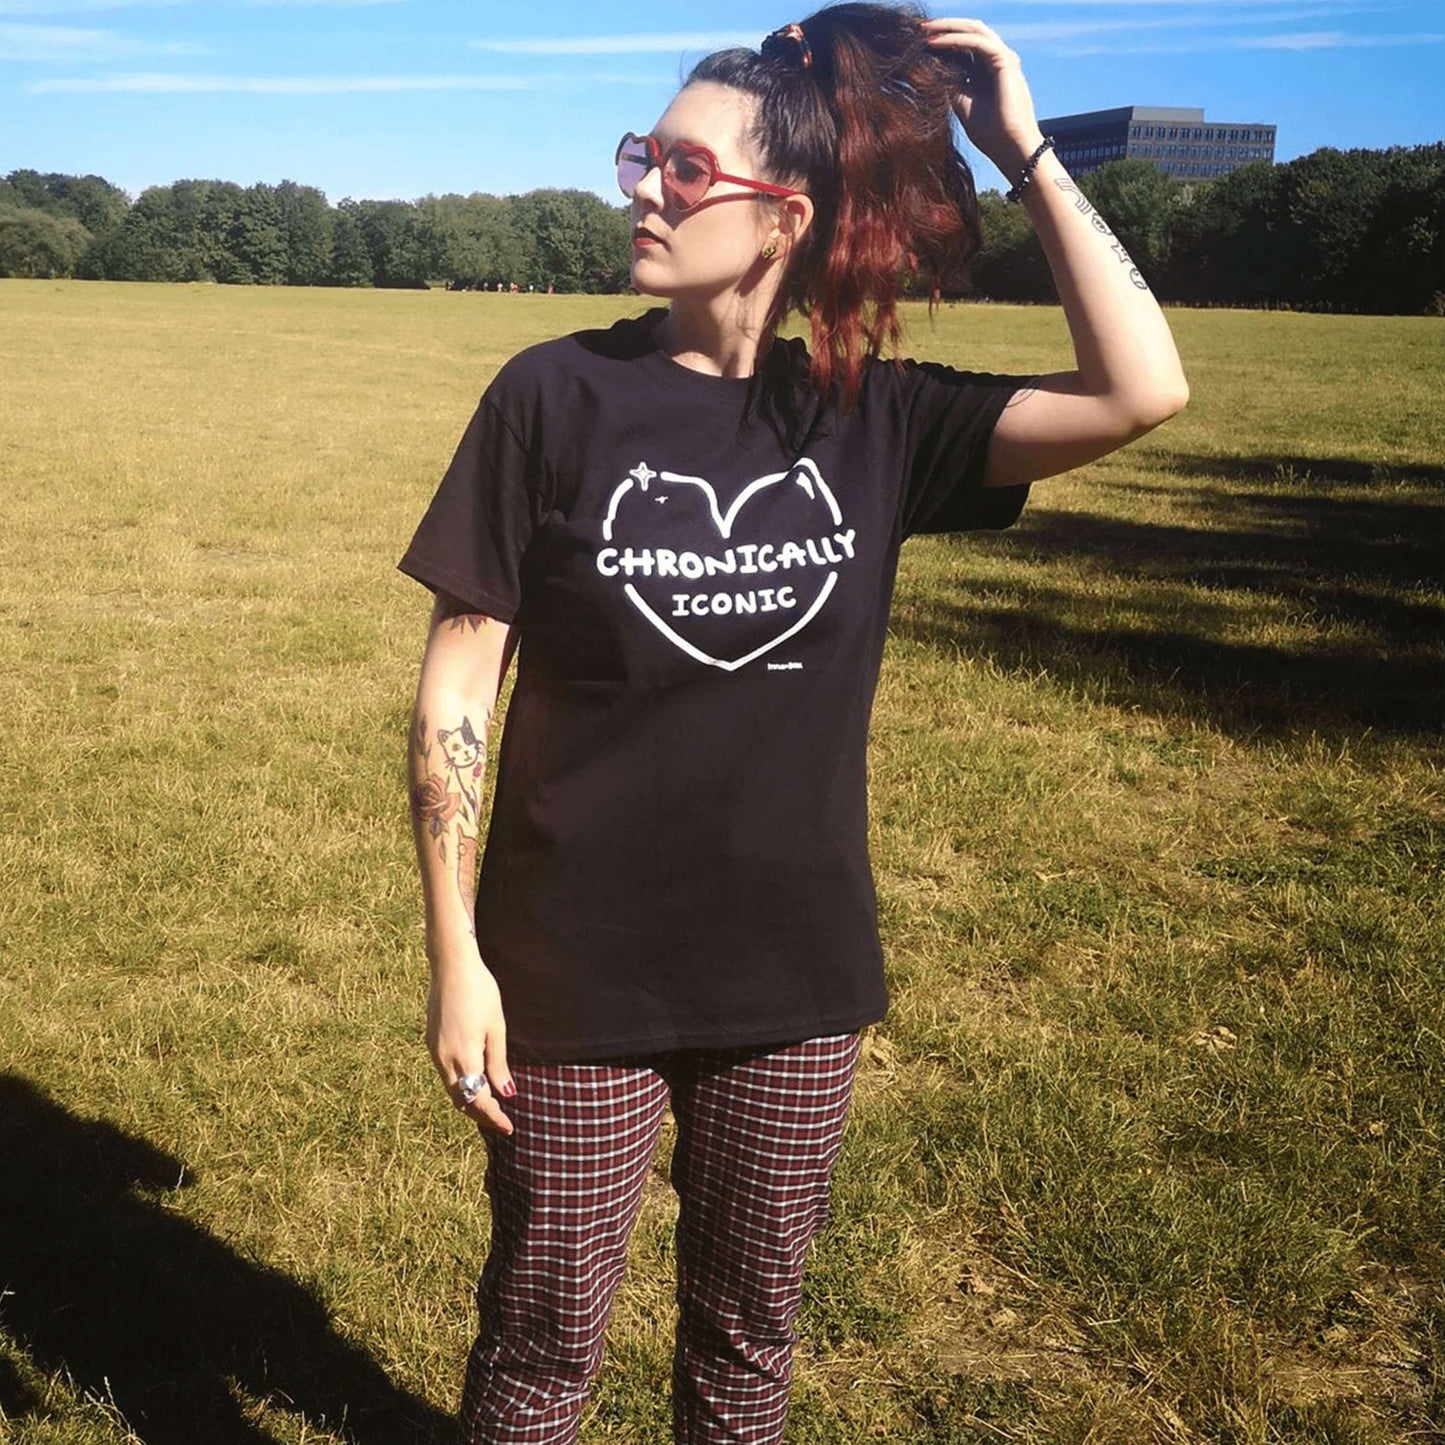 The Chronically Iconic black tee modelled by Nikky, with long brown hair in a ponytail and tattoos. She is facing forward looking off to the left whilst brushing her hand through her ponytail, she is wearing a black scrunchie, red heart sunglasses and red tartan high waist trousers. The short sleeve t-shirt features a white heart outline with sparkles and centre text reading 'chronically iconic' with the innabox logo underneath. The design is raising awareness for chronic illness and invisible illness.